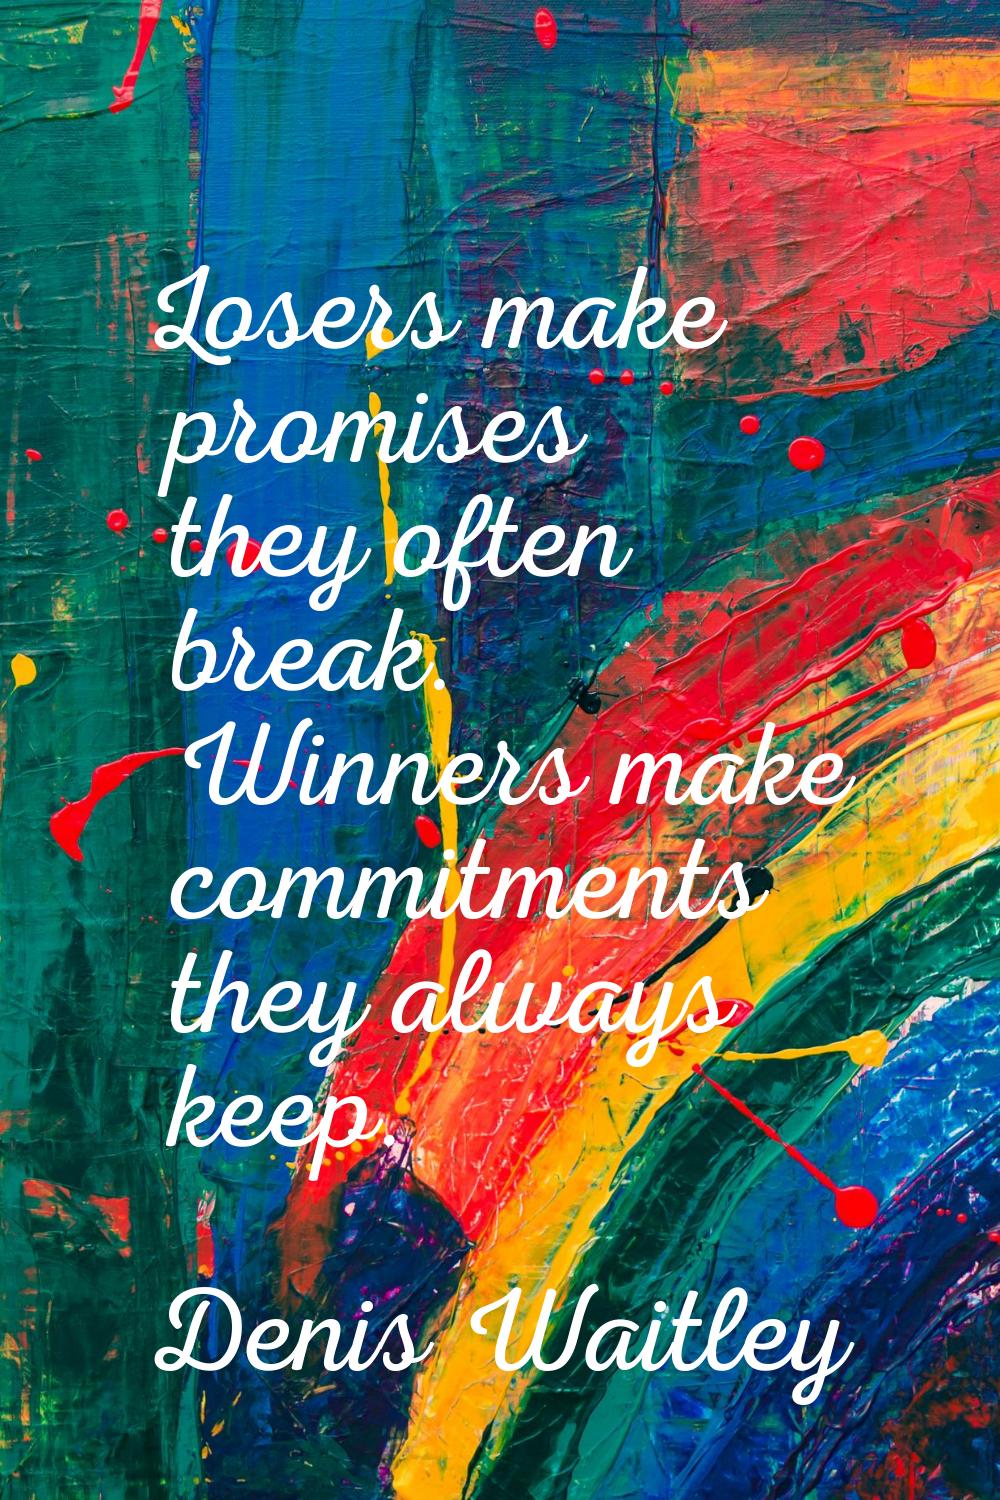 Losers make promises they often break. Winners make commitments they always keep.